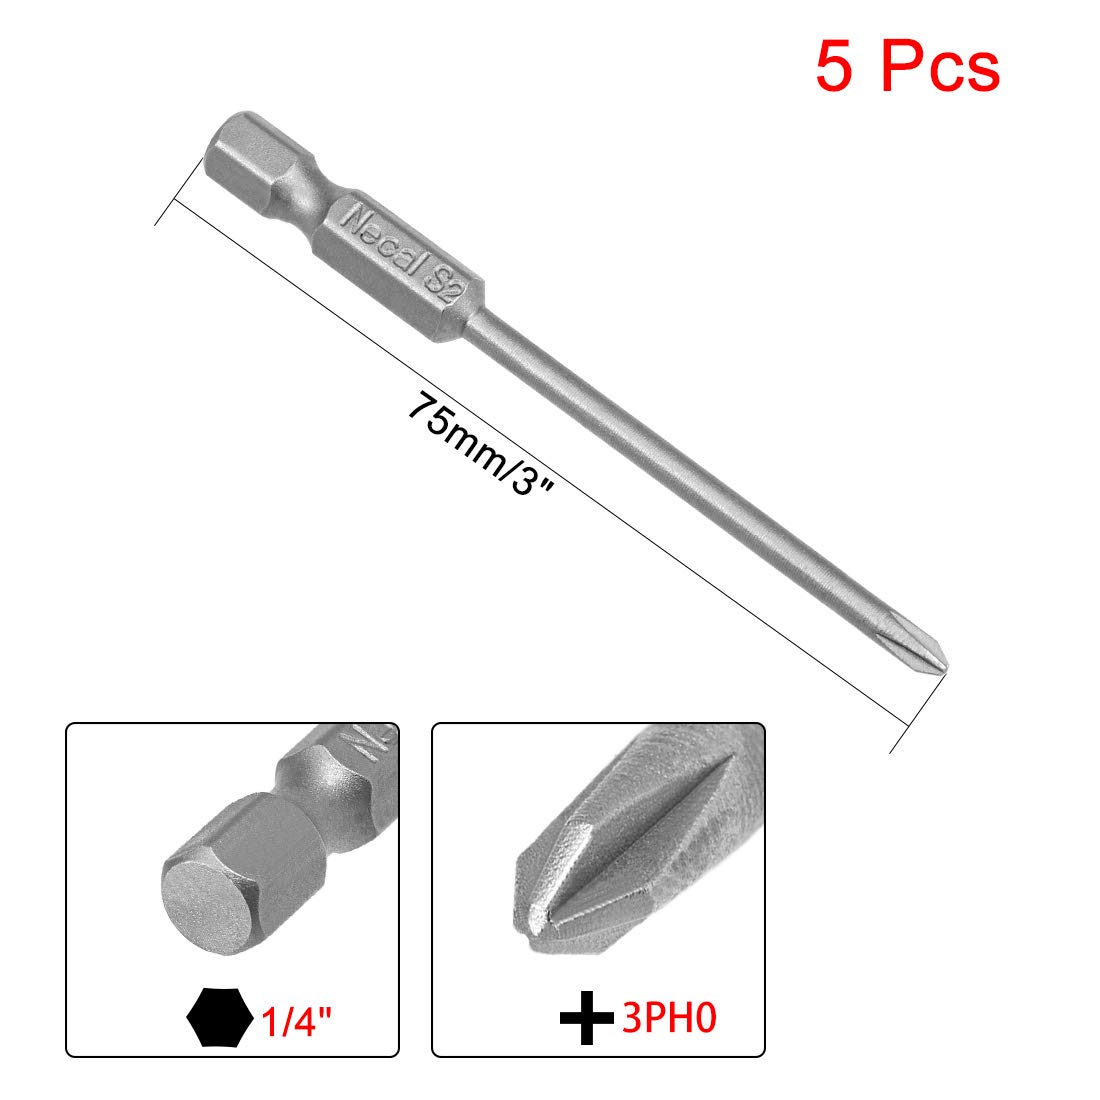 uxcell 5 Pcs 3mm PH0 Magnetic Phillips Screwdriver Bits, 1/4 Inch Hex Shank 3-inch Length S2 Power Tool